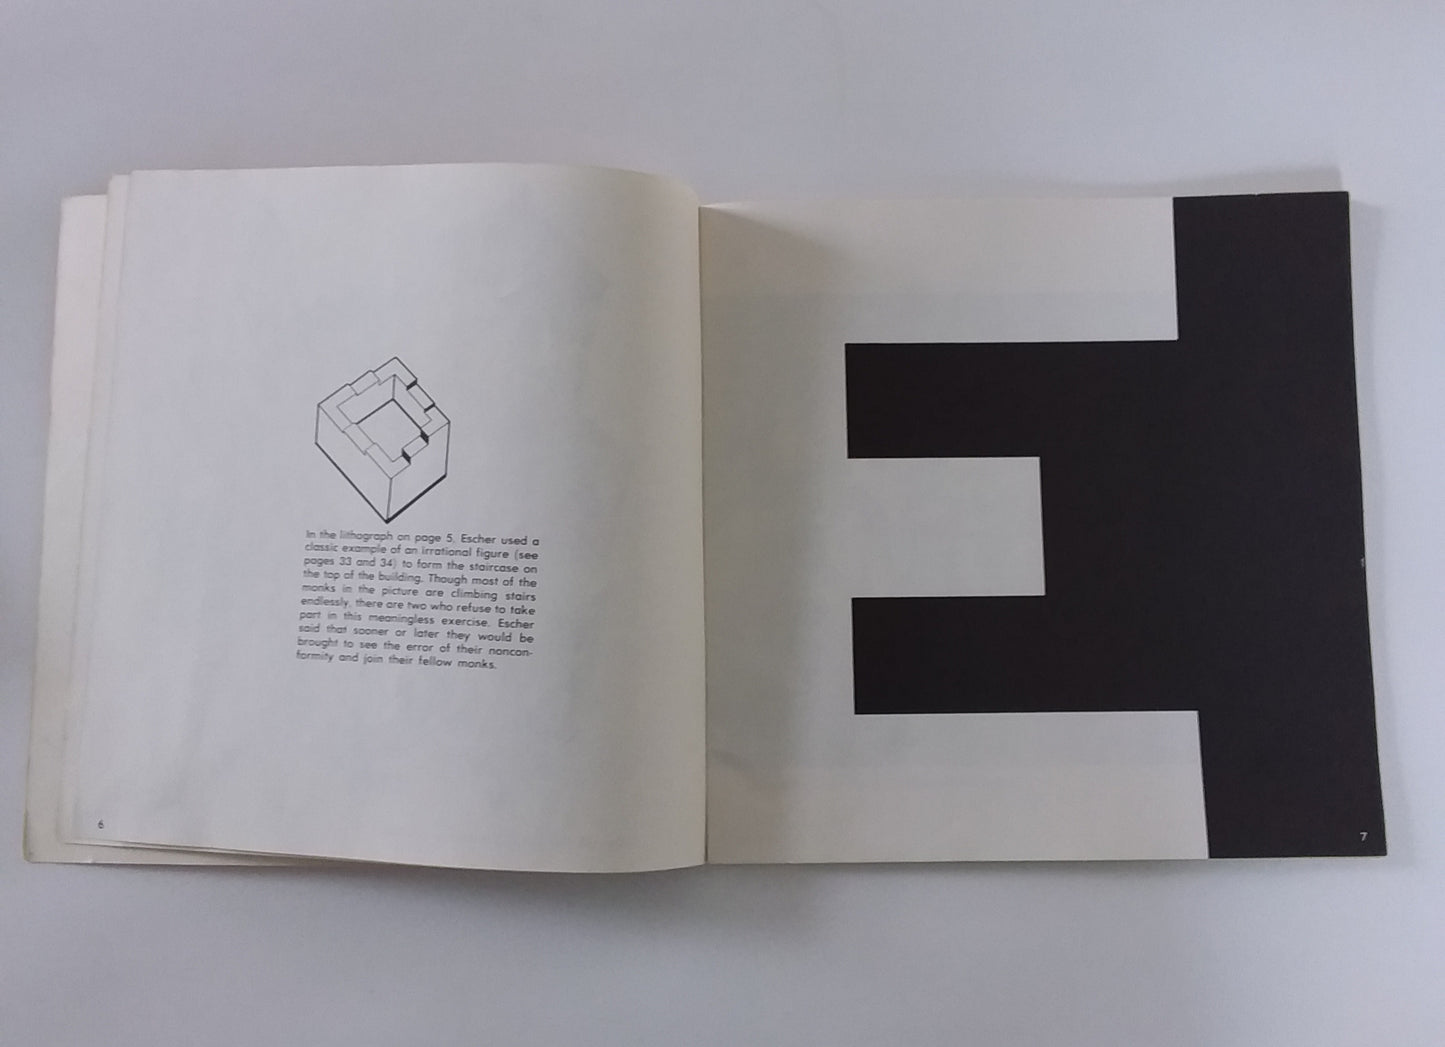 Optricks: A Book Of Optical Illusions